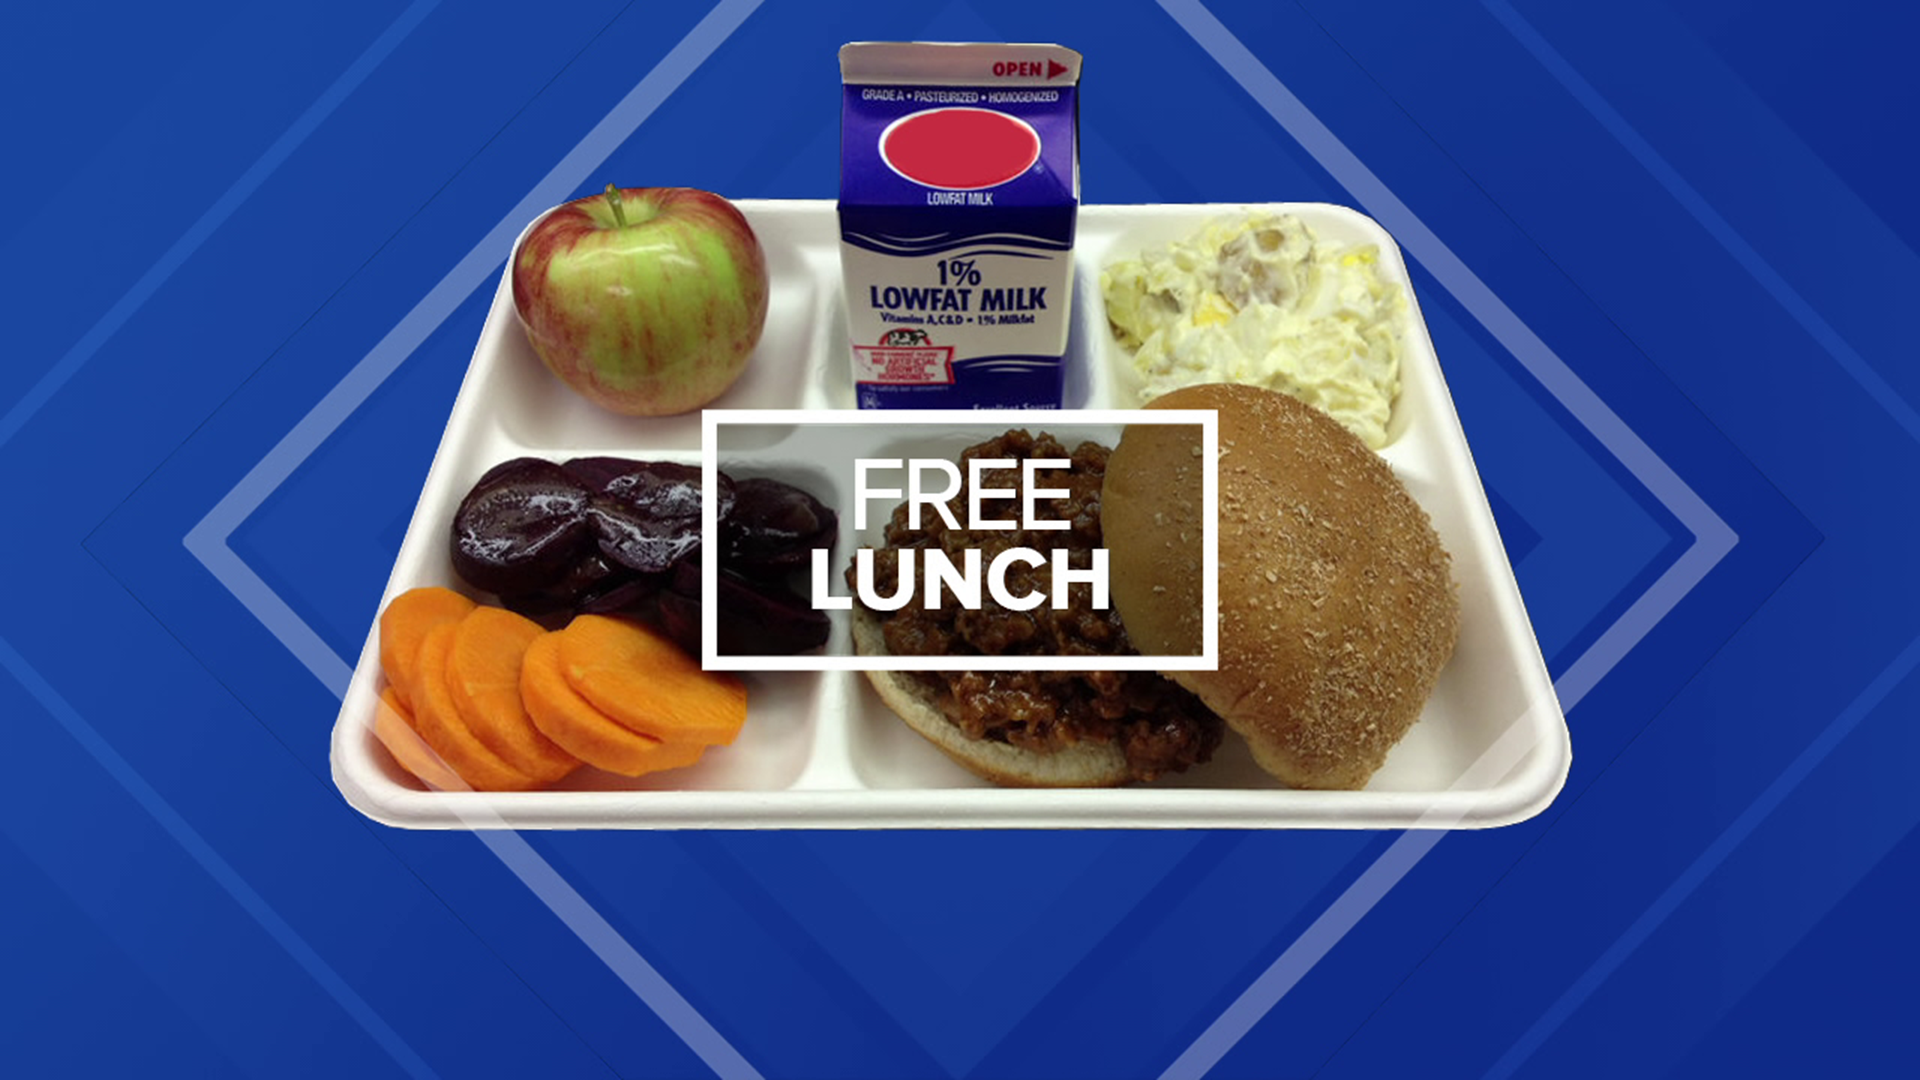 As more COVID-19 measures become relaxed, congress has decided to stop free school meals on June 30.